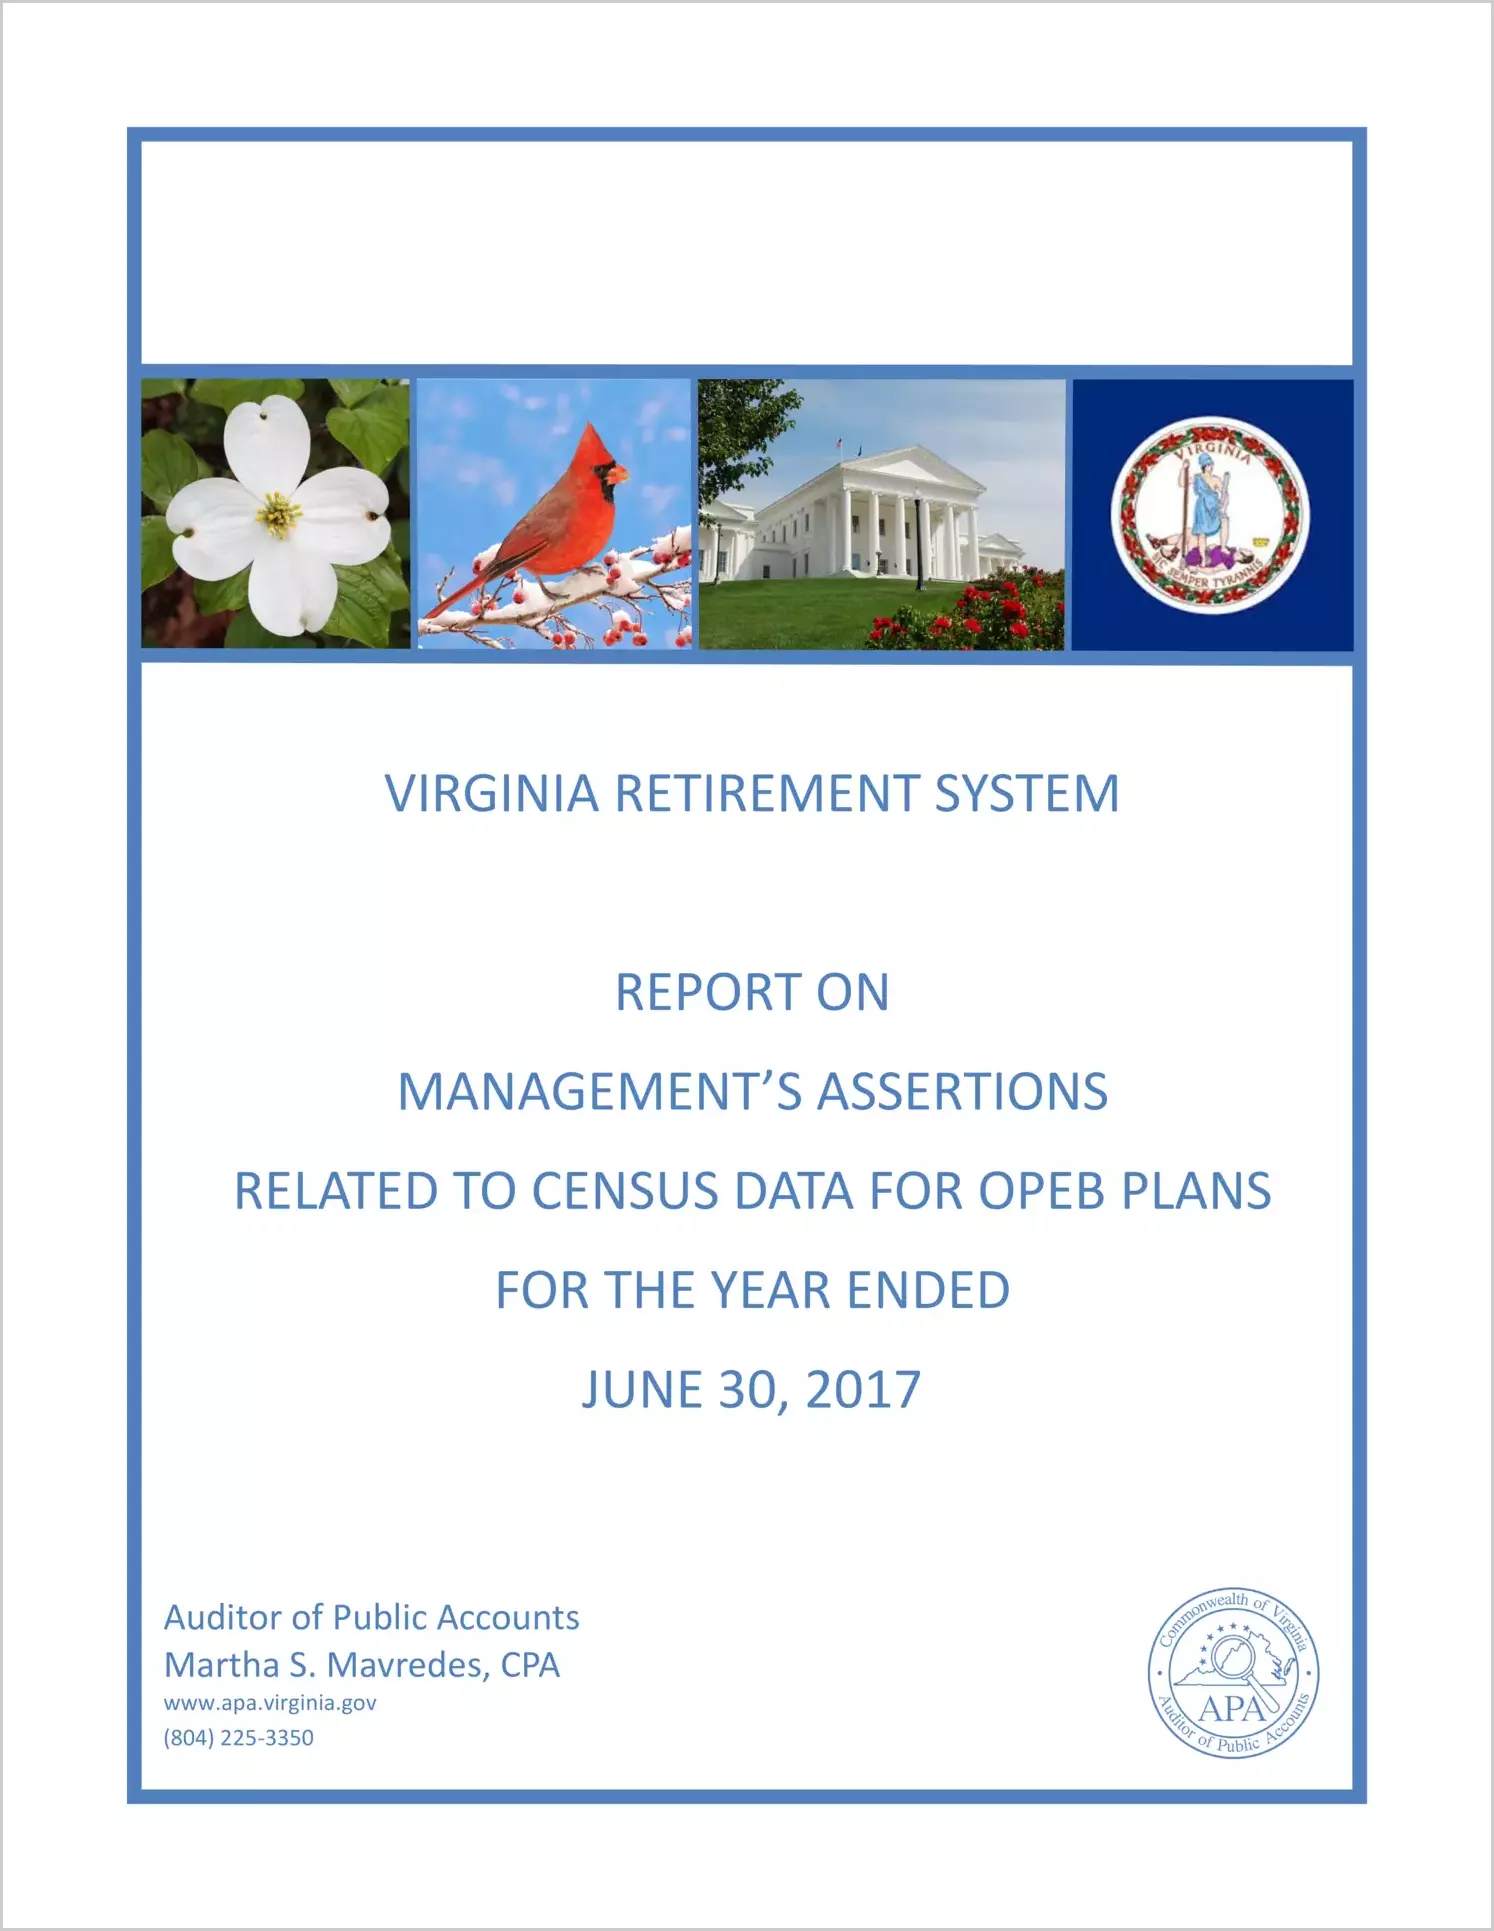 APA Report on VRS Management Assertions Related to Census Data OPEB Plans for the year ended 6/30/2017